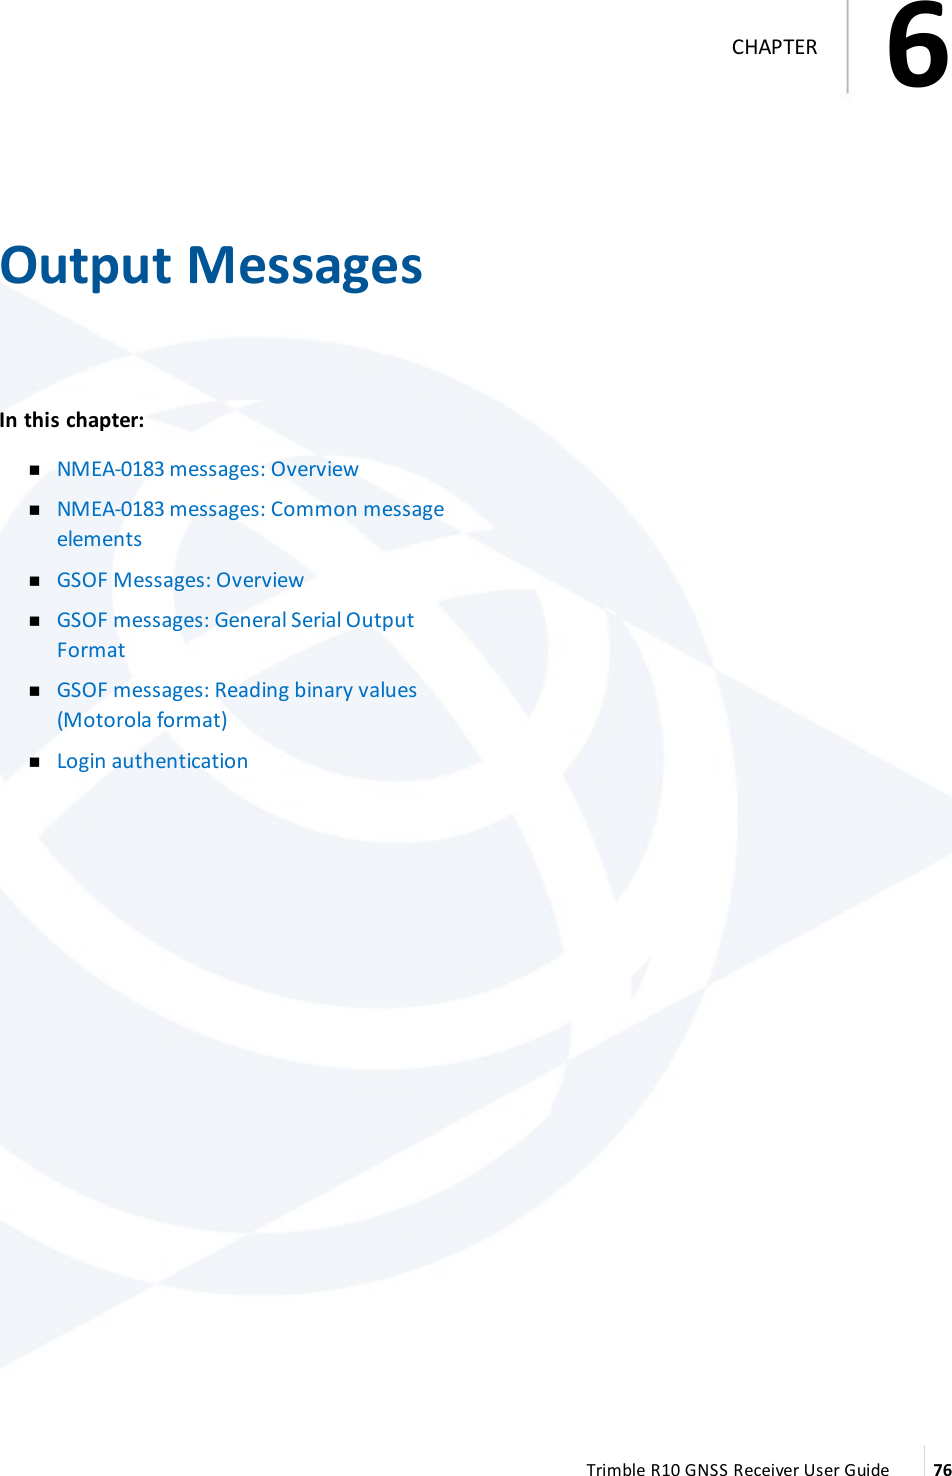 6   Output MessagesIn this chapter:  nNMEA-0183 messages: Overview nNMEA-0183 messages: Common message elements nGSOF Messages: Overview nGSOF messages: General Serial Output Format nGSOF messages: Reading binary values (Motorola format) nLogin authentication  Trimble R10 GNSS Receiver User Guide 766CHAPTER